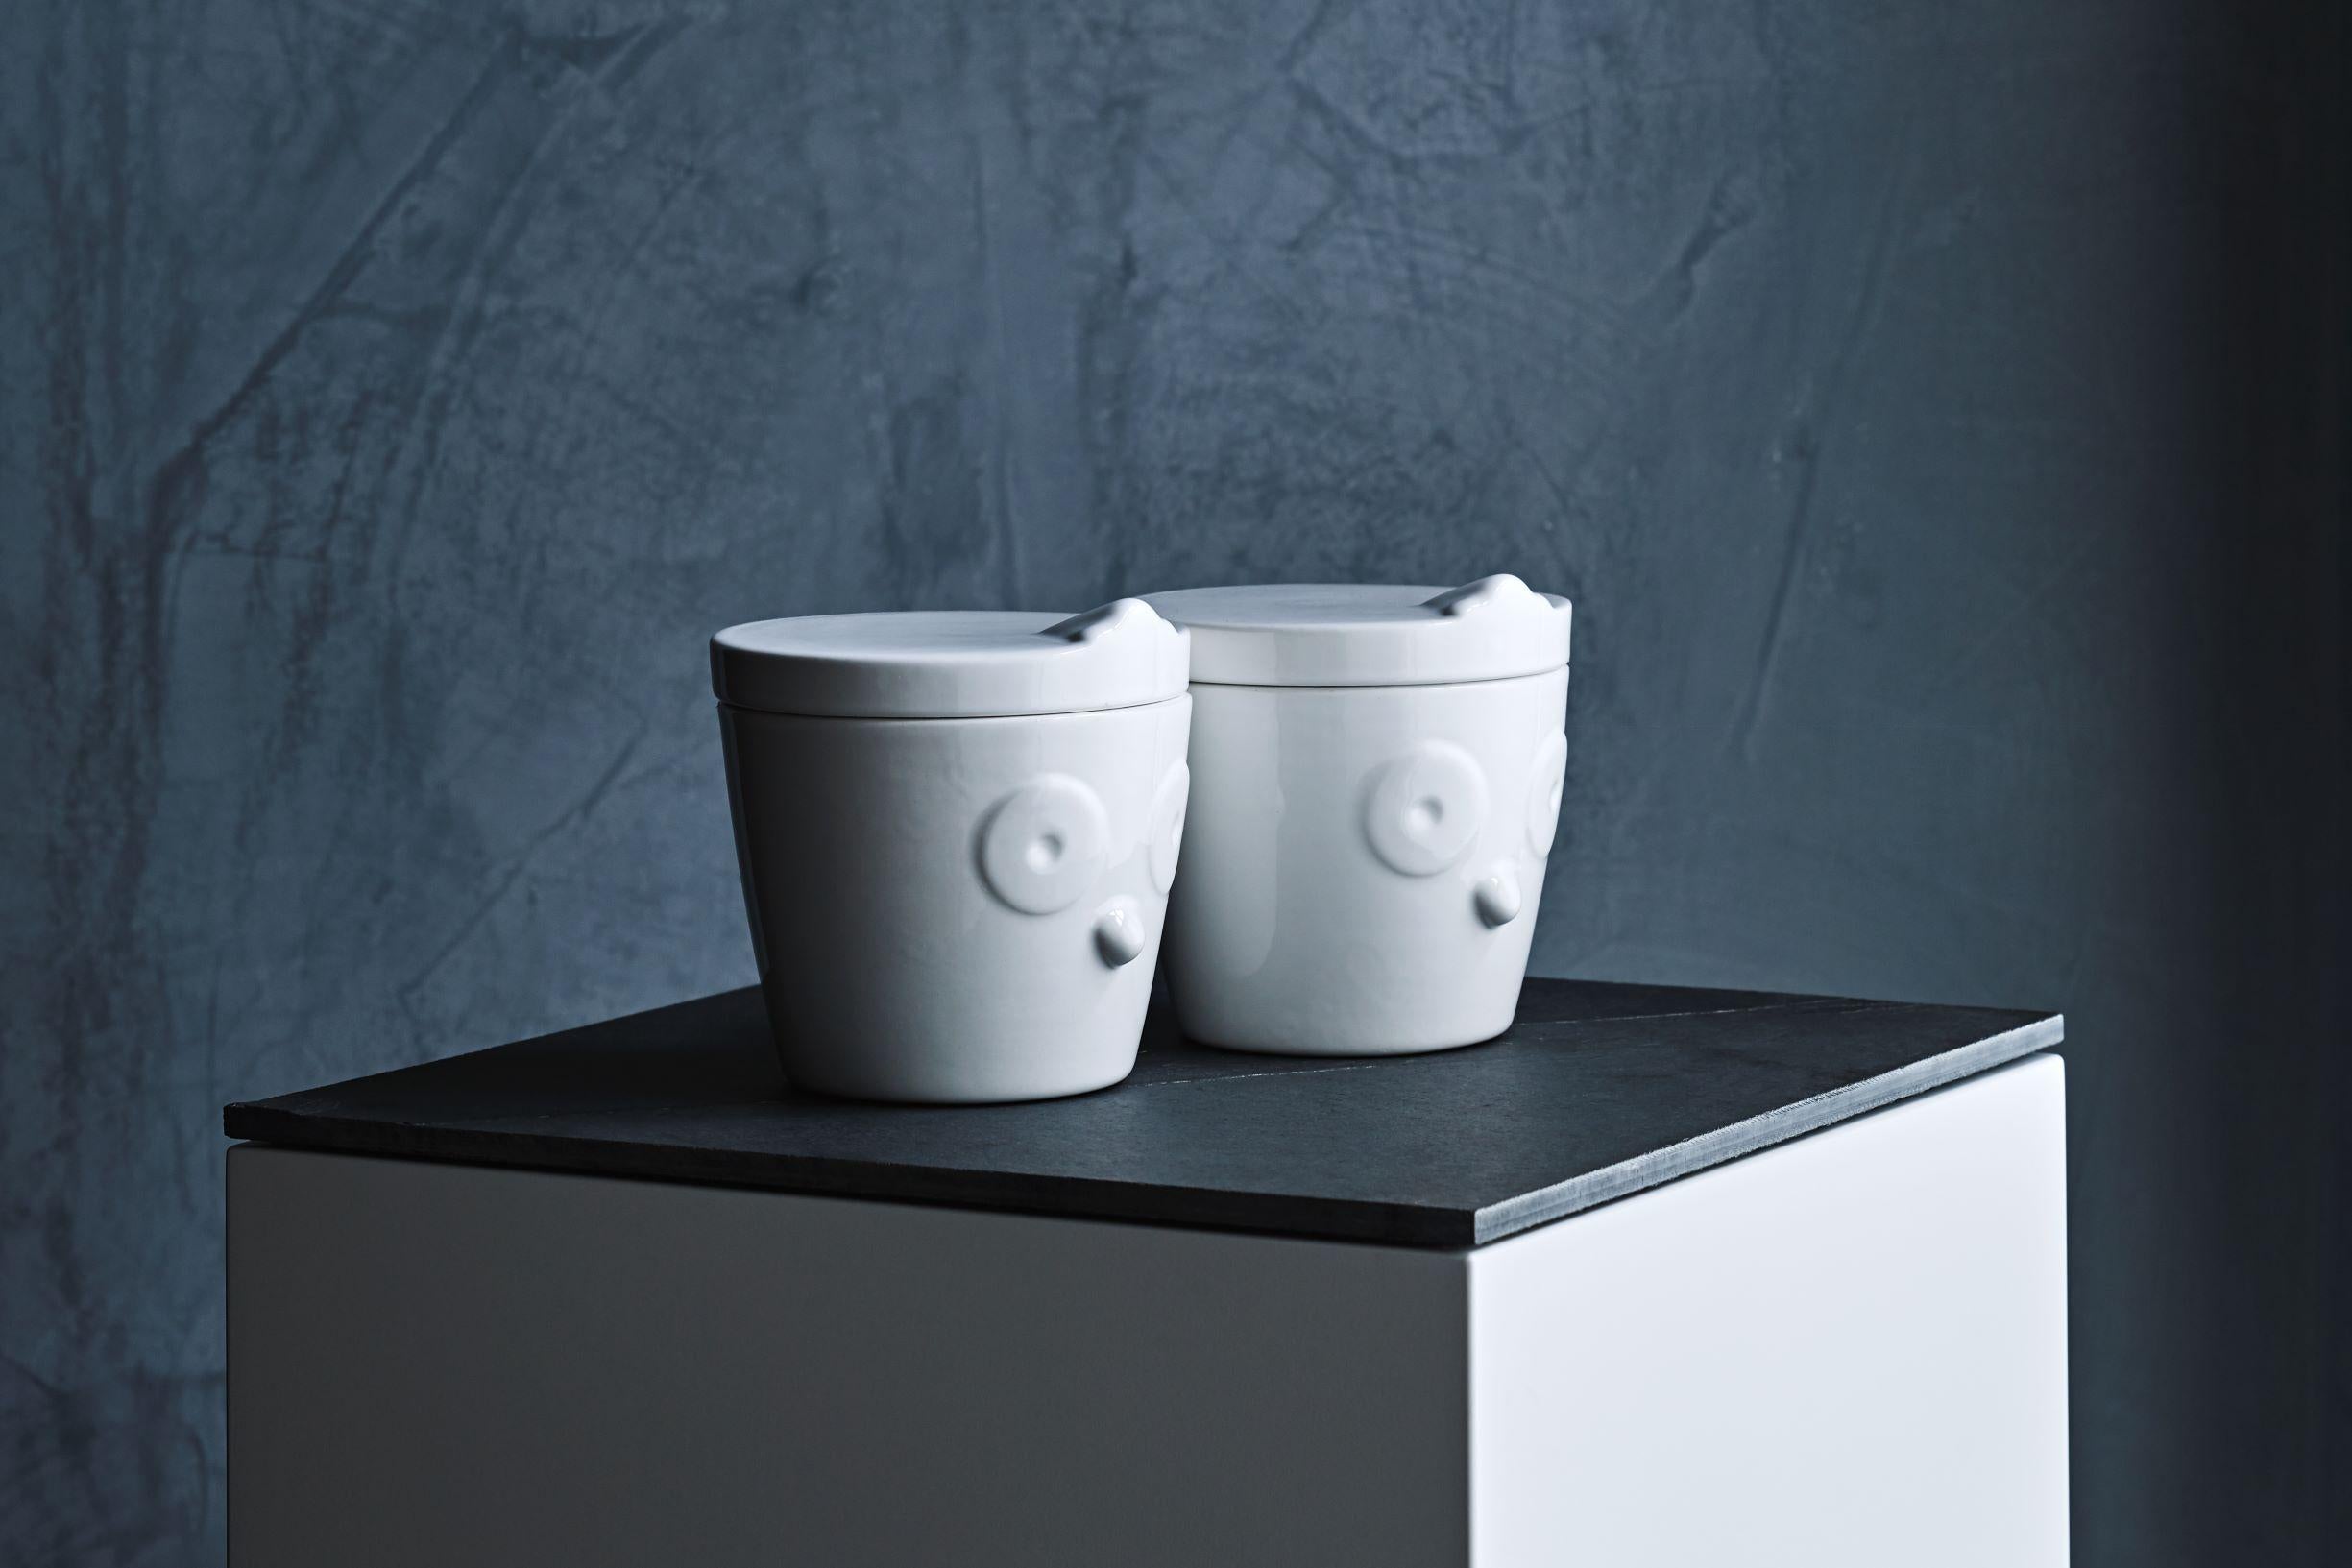 The ceramic canister jars with lids from SoShiro’s Ainu collection, a collaboration between award-winning artist Toru Kaizawa and Shiro Muchiri, are generously sized and can be used for honey, sugar, or any chosen condiment, such as herbs and